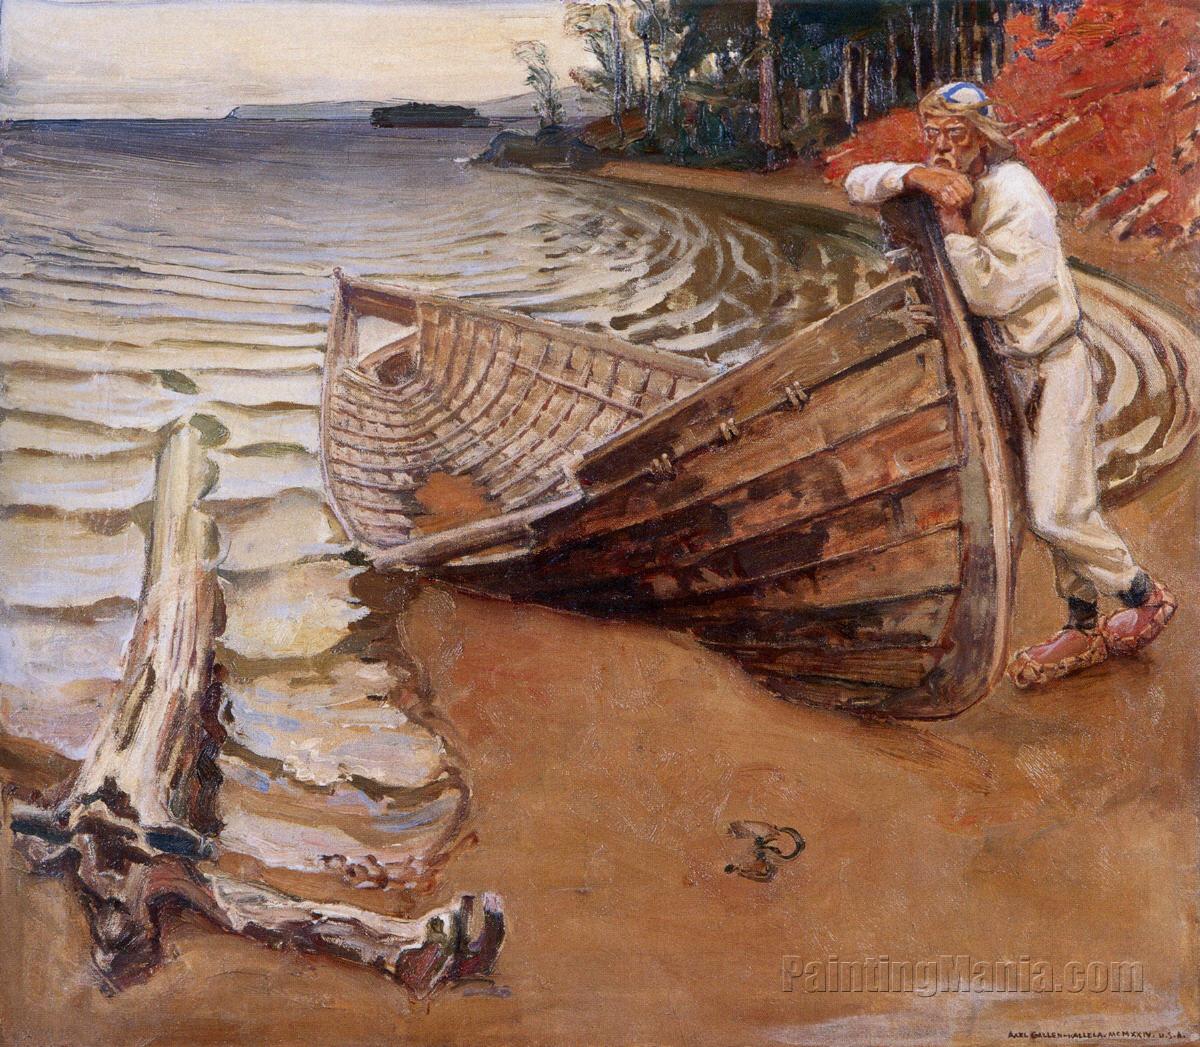 The Lamenting Boat